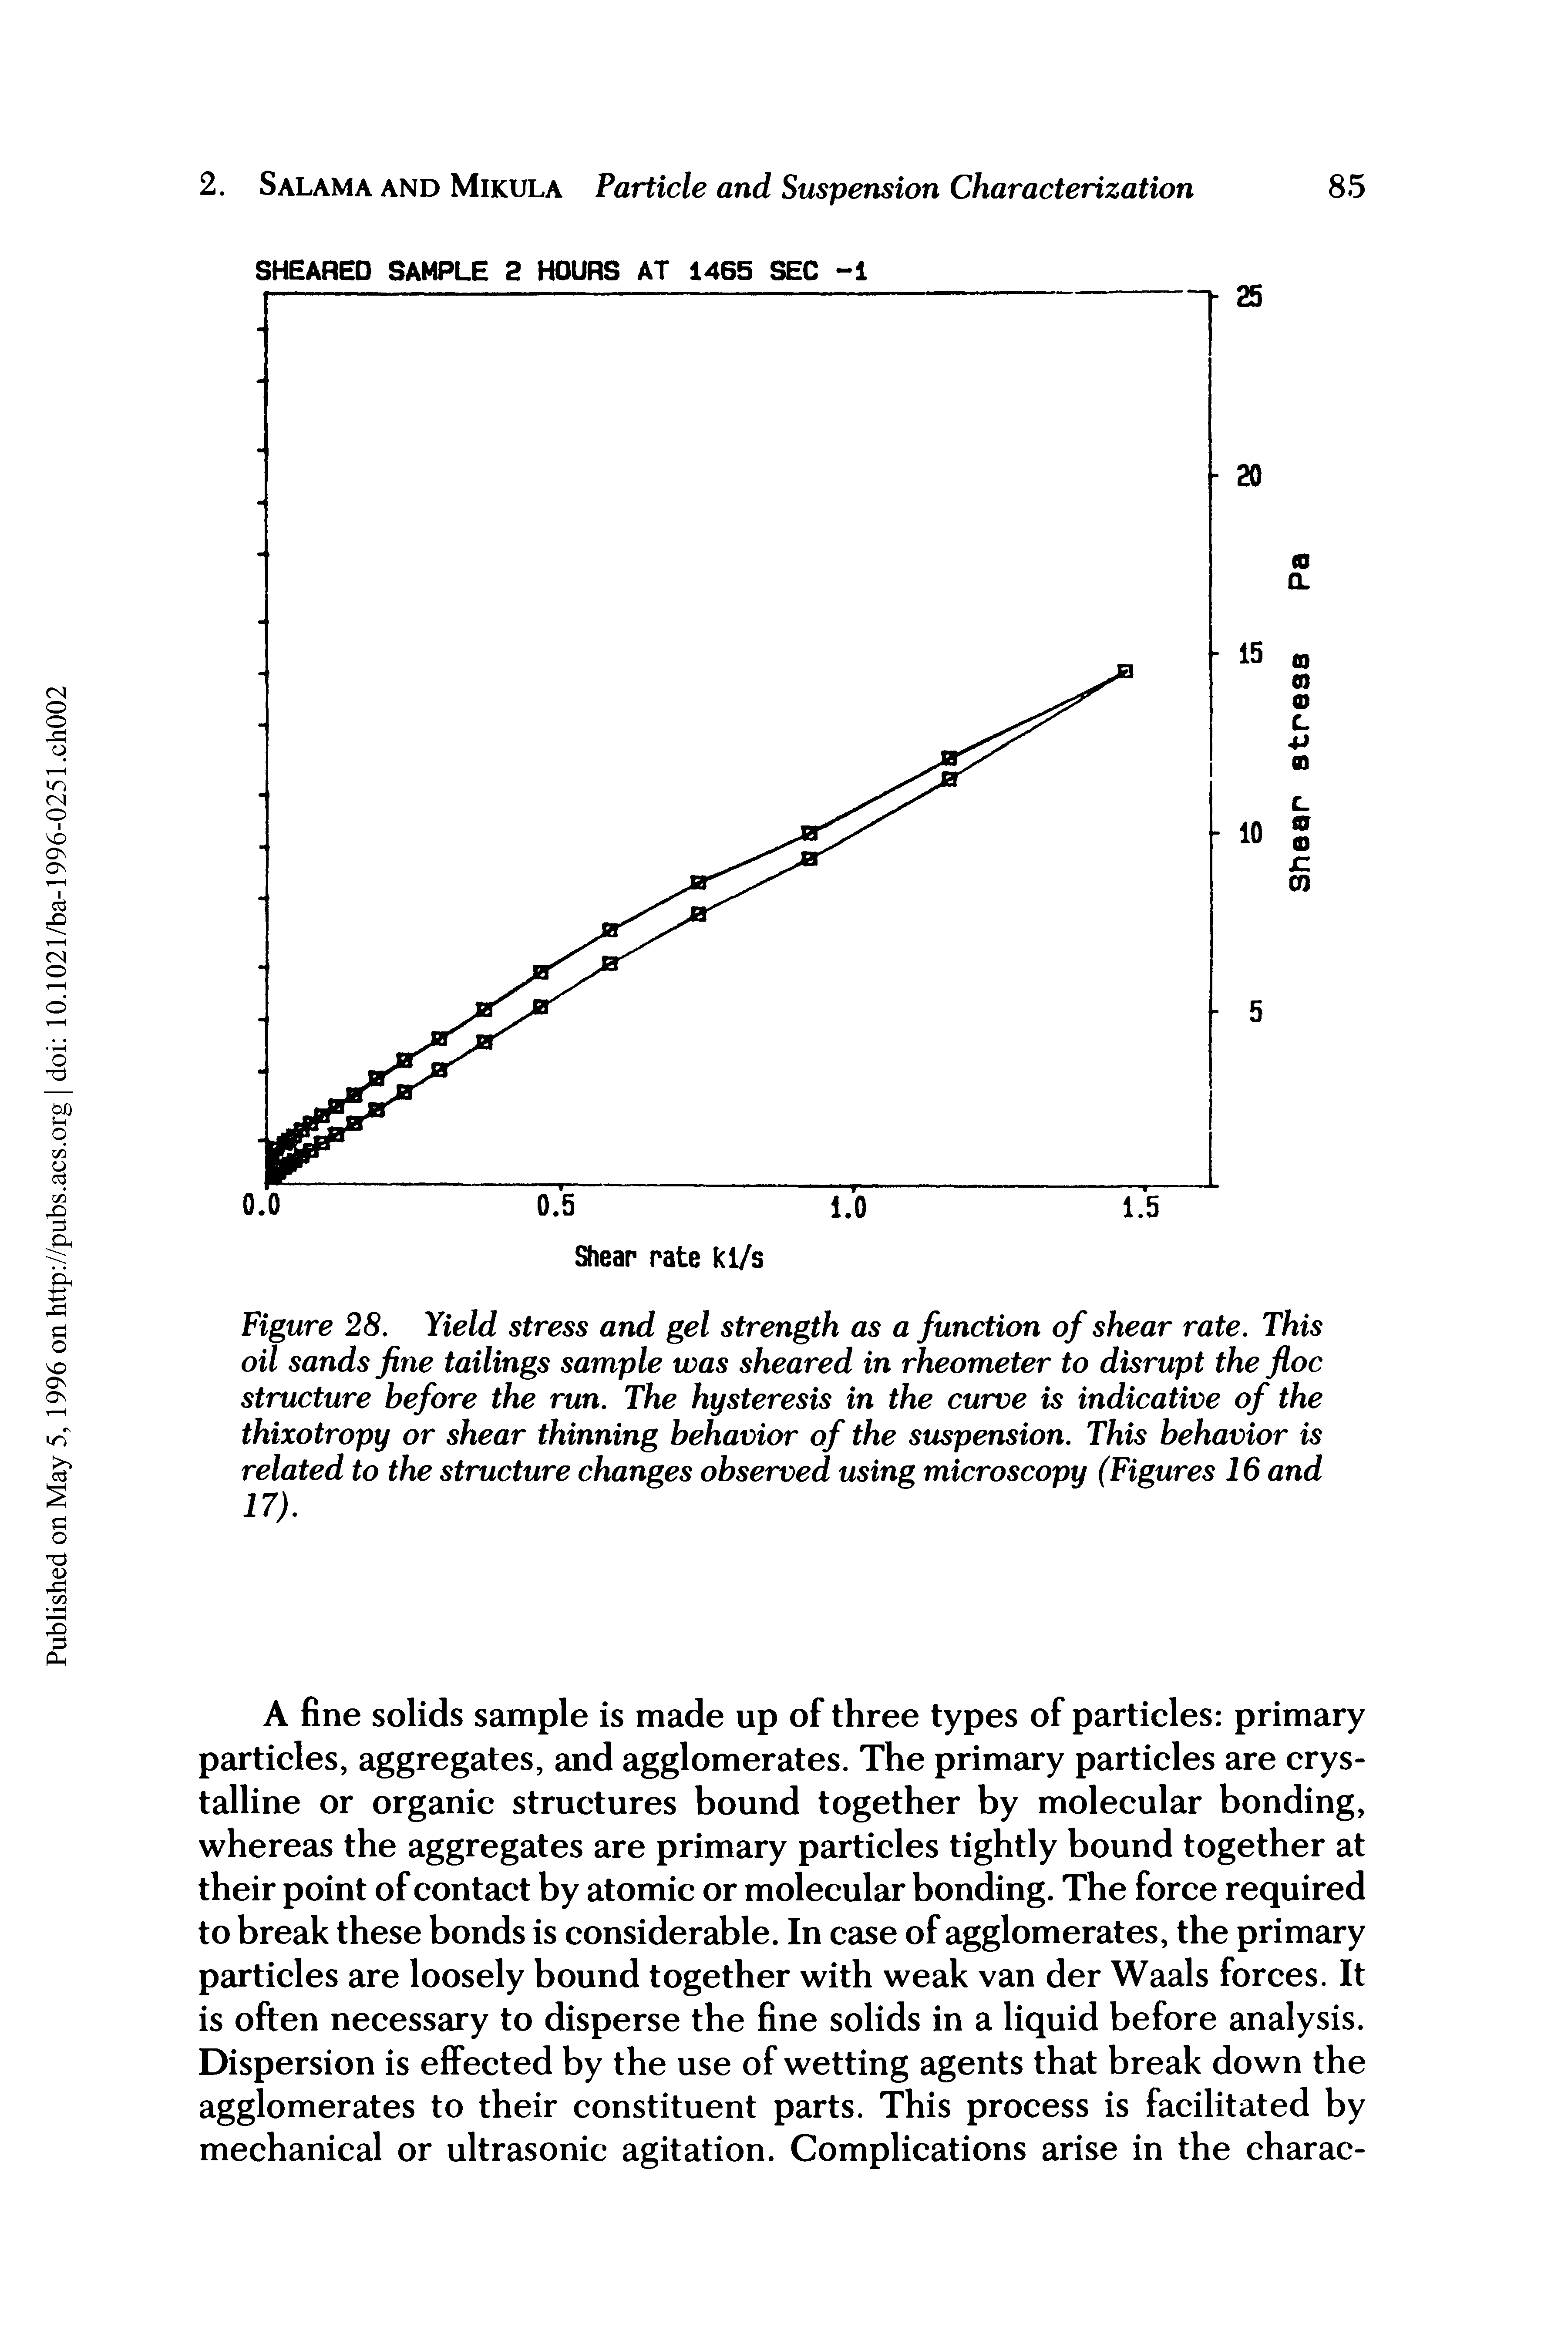 Figure 28. Yield stress and gel strength as a function of shear rate. This oil sands fine tailings sample was sheared in rheometer to disrupt the floe structure before the run. The hysteresis in the curve is indicative of the thixotropy or shear thinning behavior of the suspension. This behavior is related to the structure changes observed using microscopy (Figures 16 and 17).